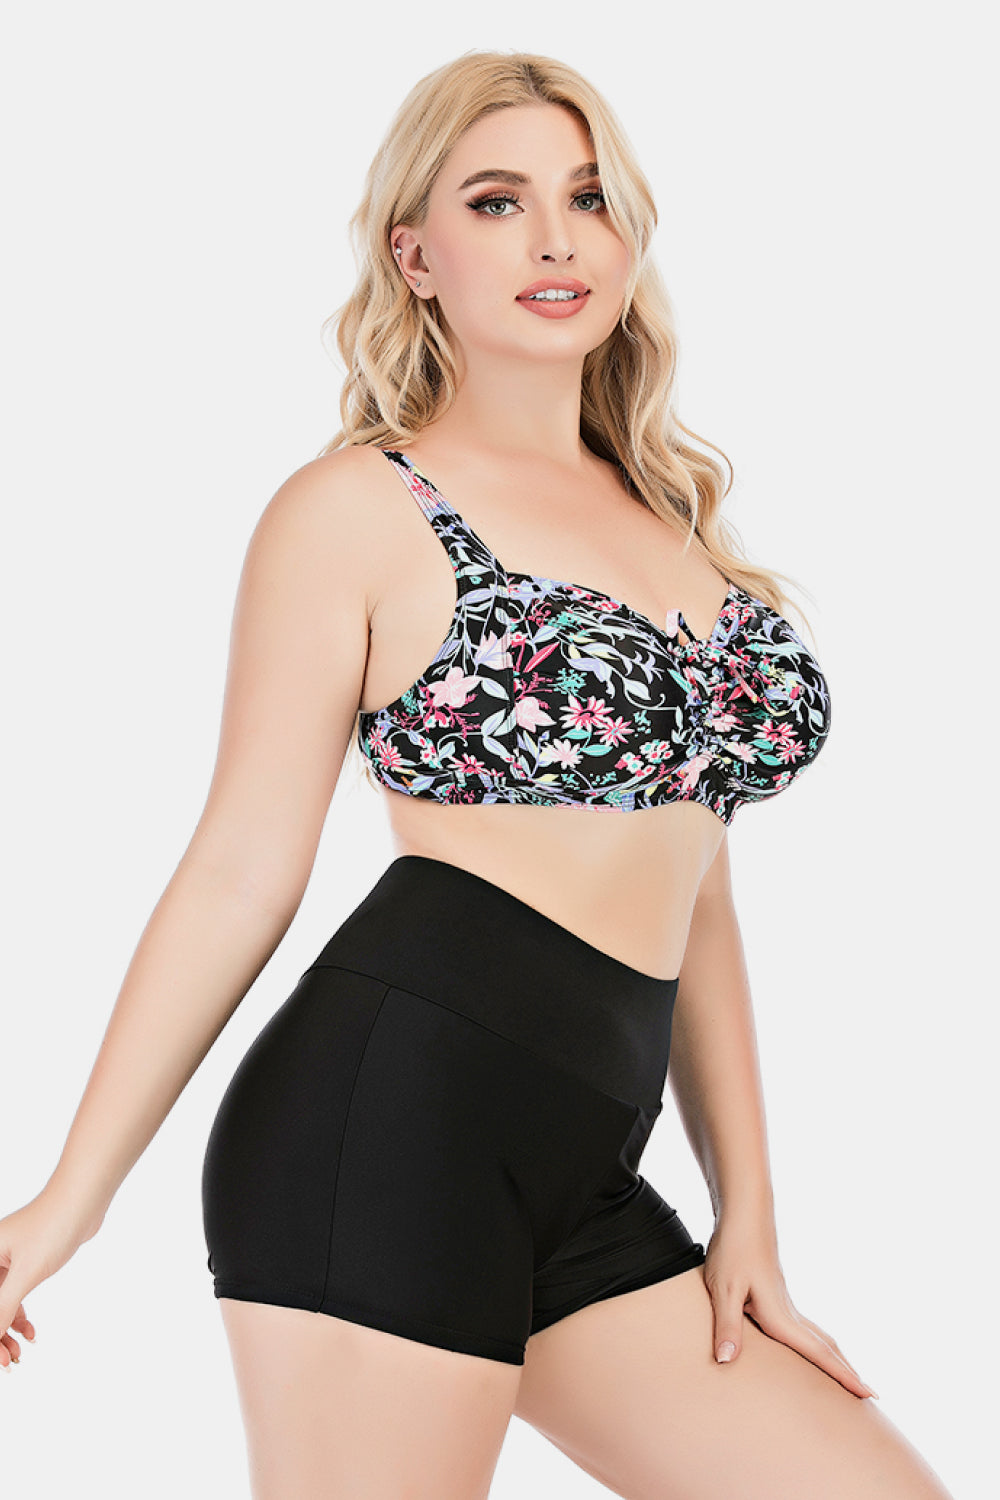 Plus Size Floral Ruched Two-Piece Swim Set - Minihomy